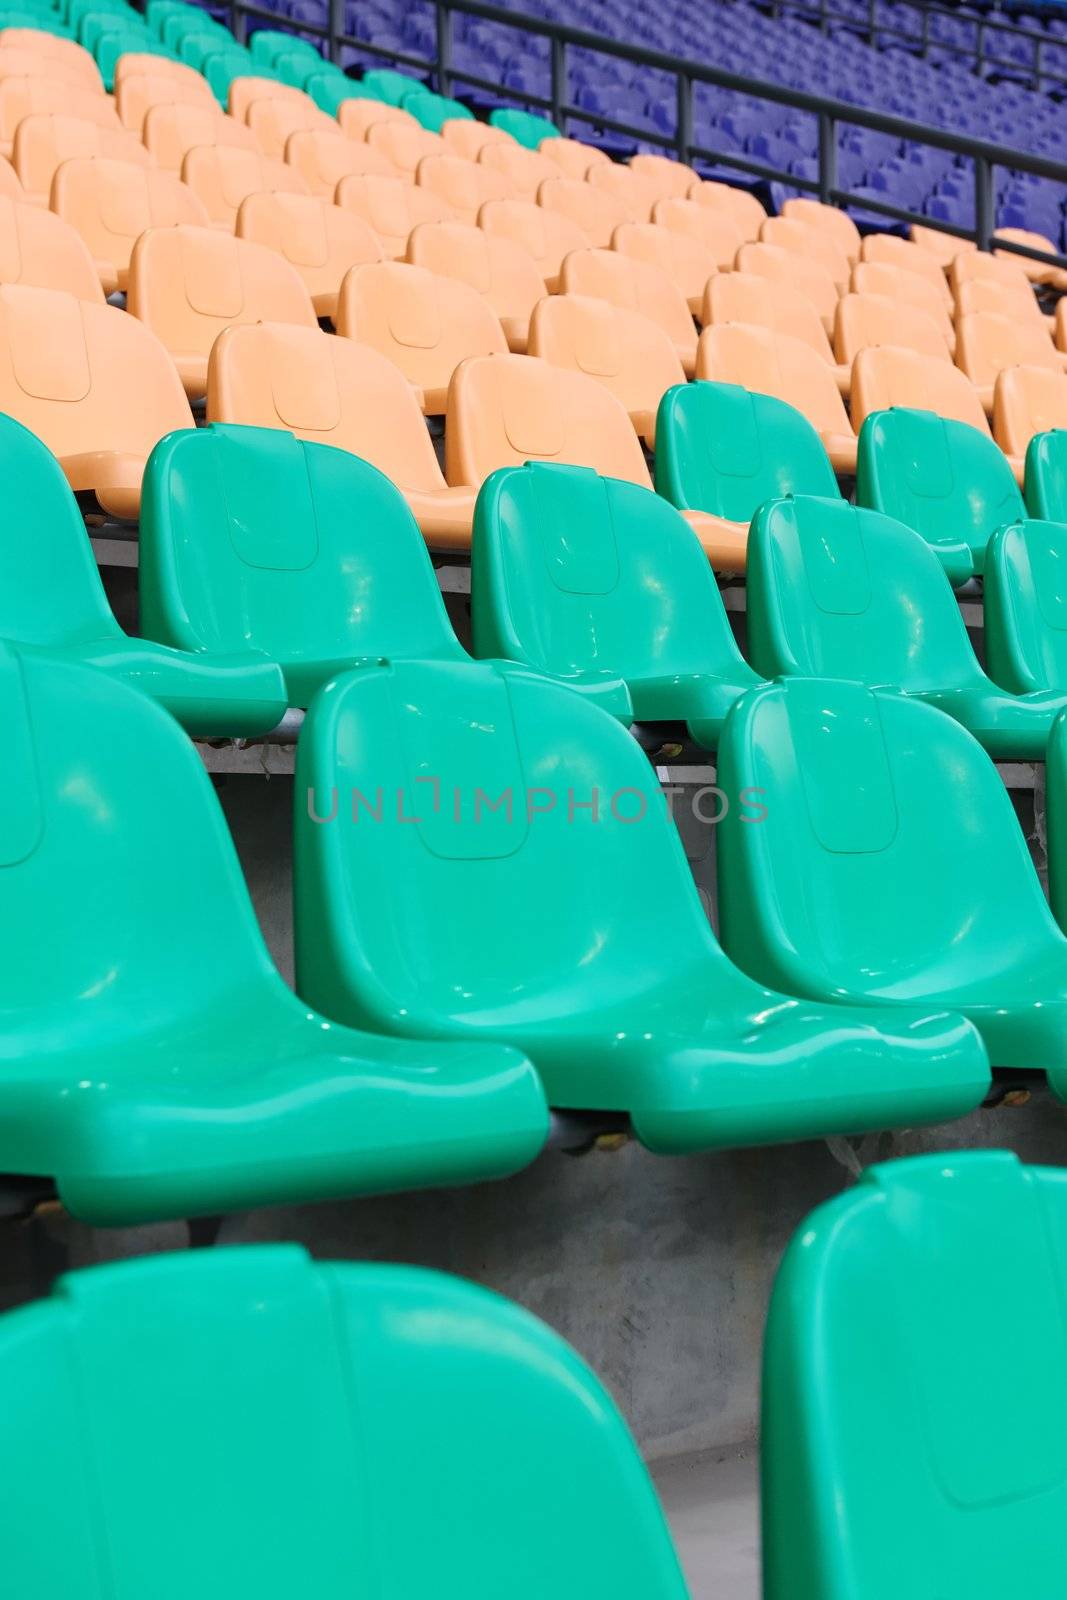 Chairs in stadium by raywoo